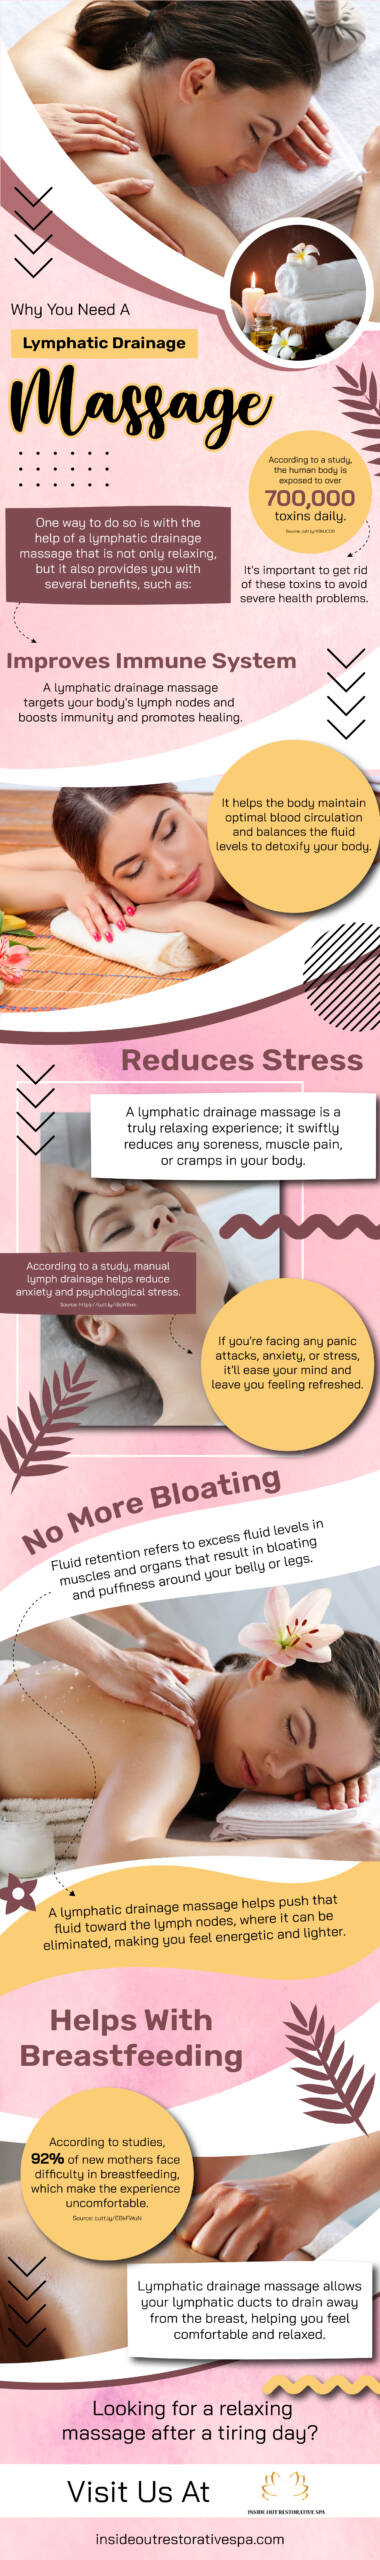 Why You Need A Lymphatic Drainage Massage - Infograph